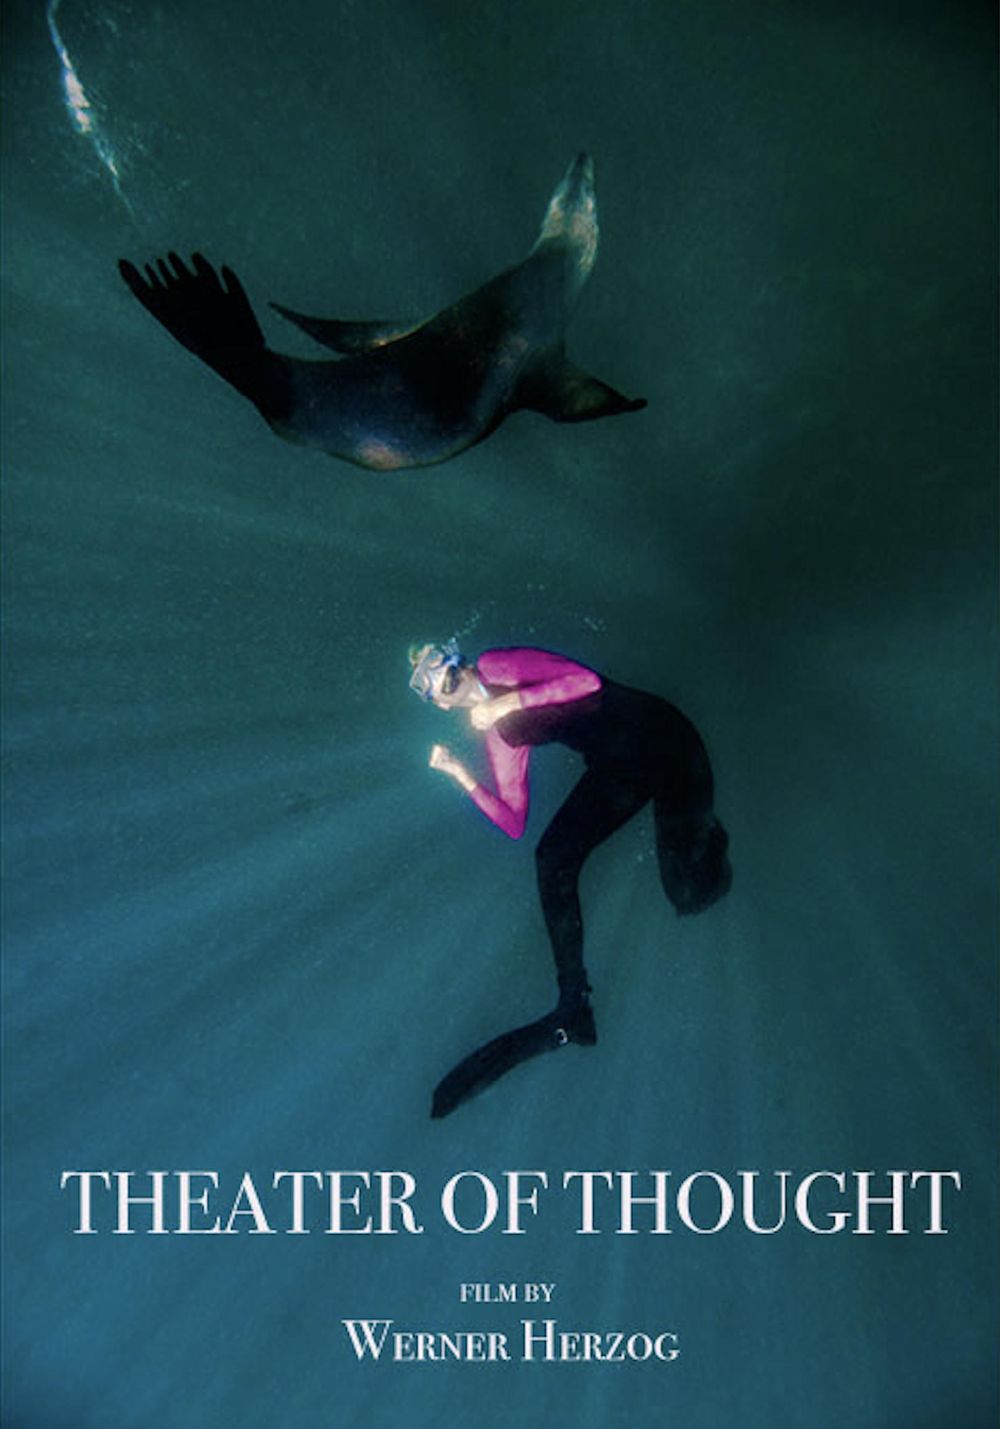 Poster al filmului "Theatre of Thought"